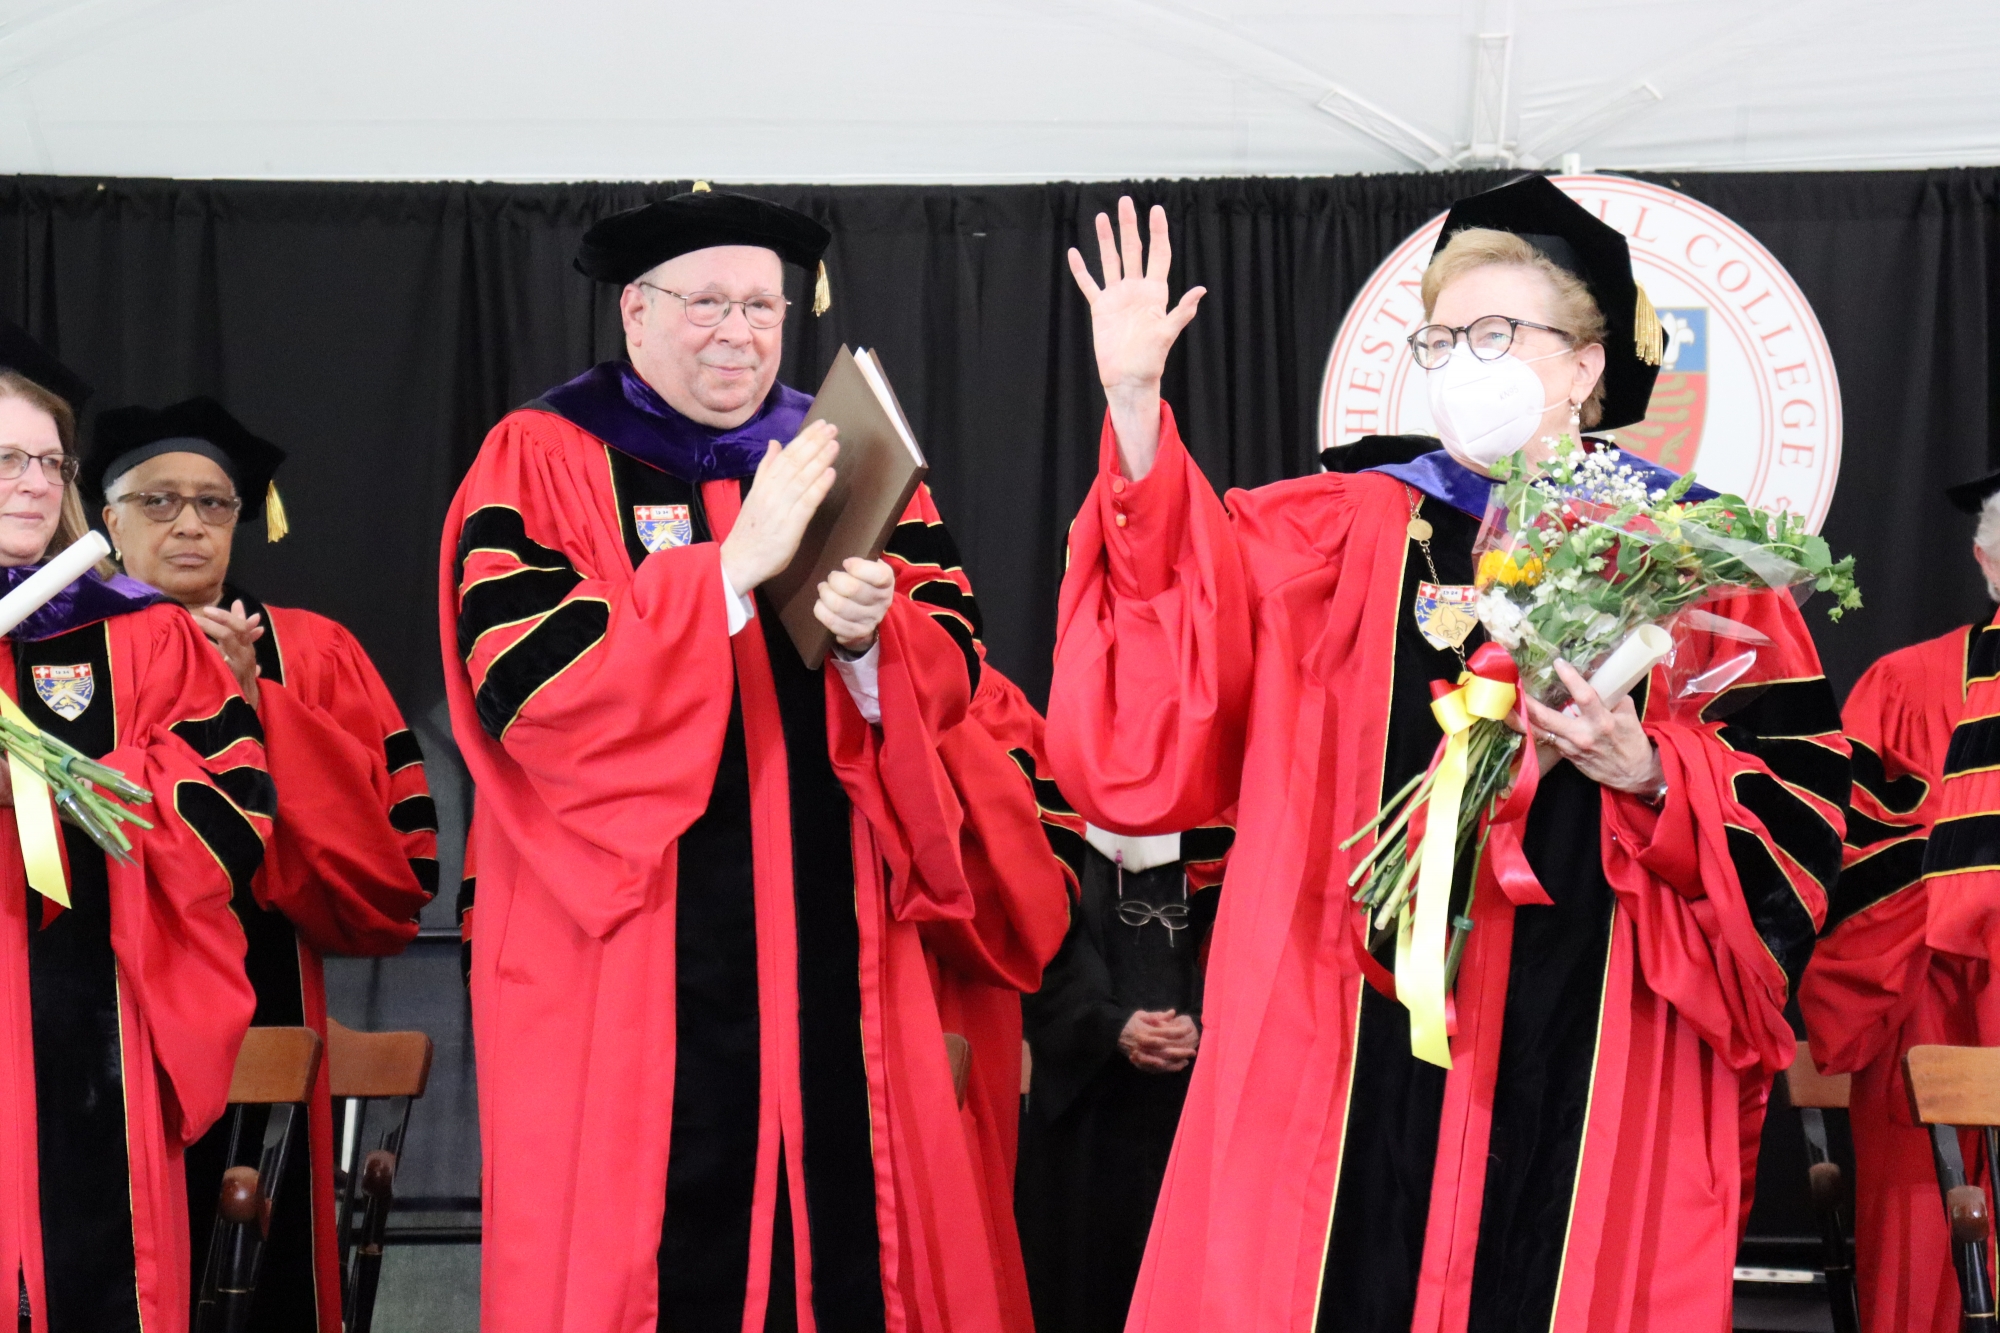 Taking one final bow, Sister Carol Jean Vale, SSJ, Ph.D., celebrated her last Commencement as President of Chestnut Hill College.